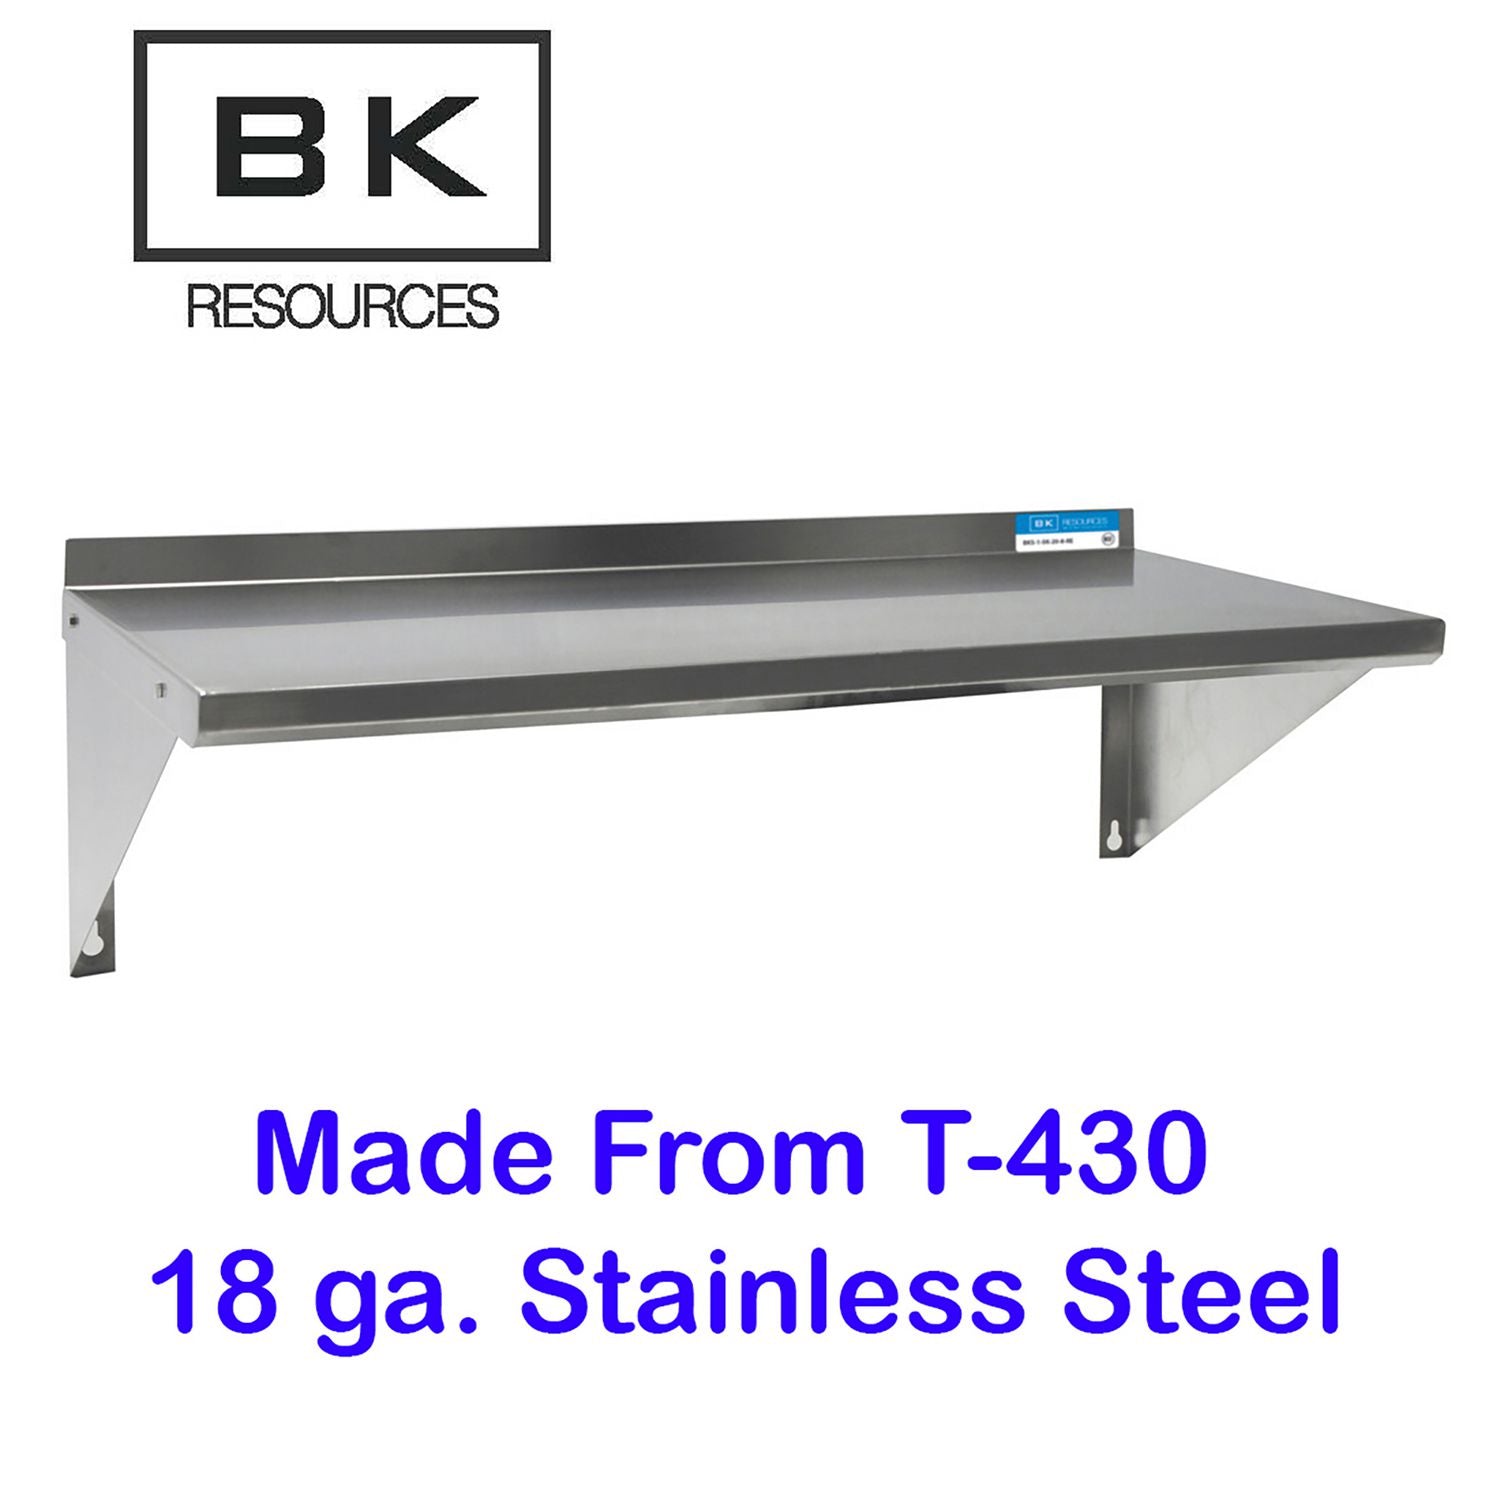 stainless-steel-economy-overshelf-32w-x-12d-x-8h-stainless-steel-silver-2-pallet-ships-in-4-6-business-days_bke2wse1232 - 3